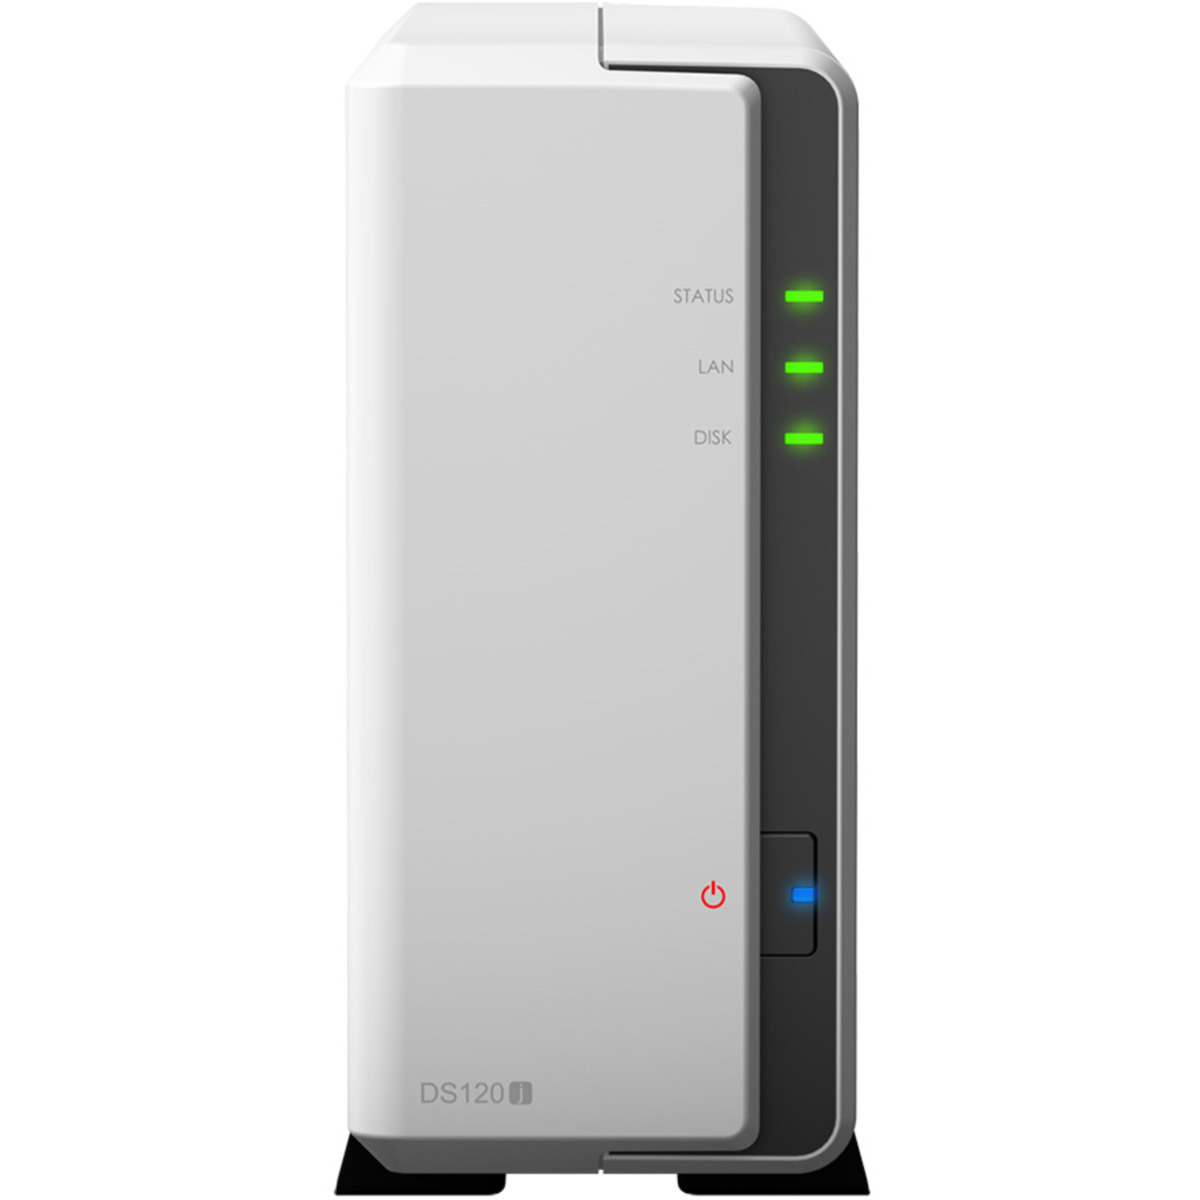 buy $291 Synology DiskStation DS120j 6tb Desktop NAS - Network Attached Storage Device 1x6000gb Western Digital Blue WD60EZAZ 3.5 5400rpm SATA 6Gb/s HDD CONSUMER Class Drives Installed - Burn-In Tested - nas headquarters buy network attached storage server device das new raid-5 free shipping usa christmas new year holiday sale DiskStation DS120j